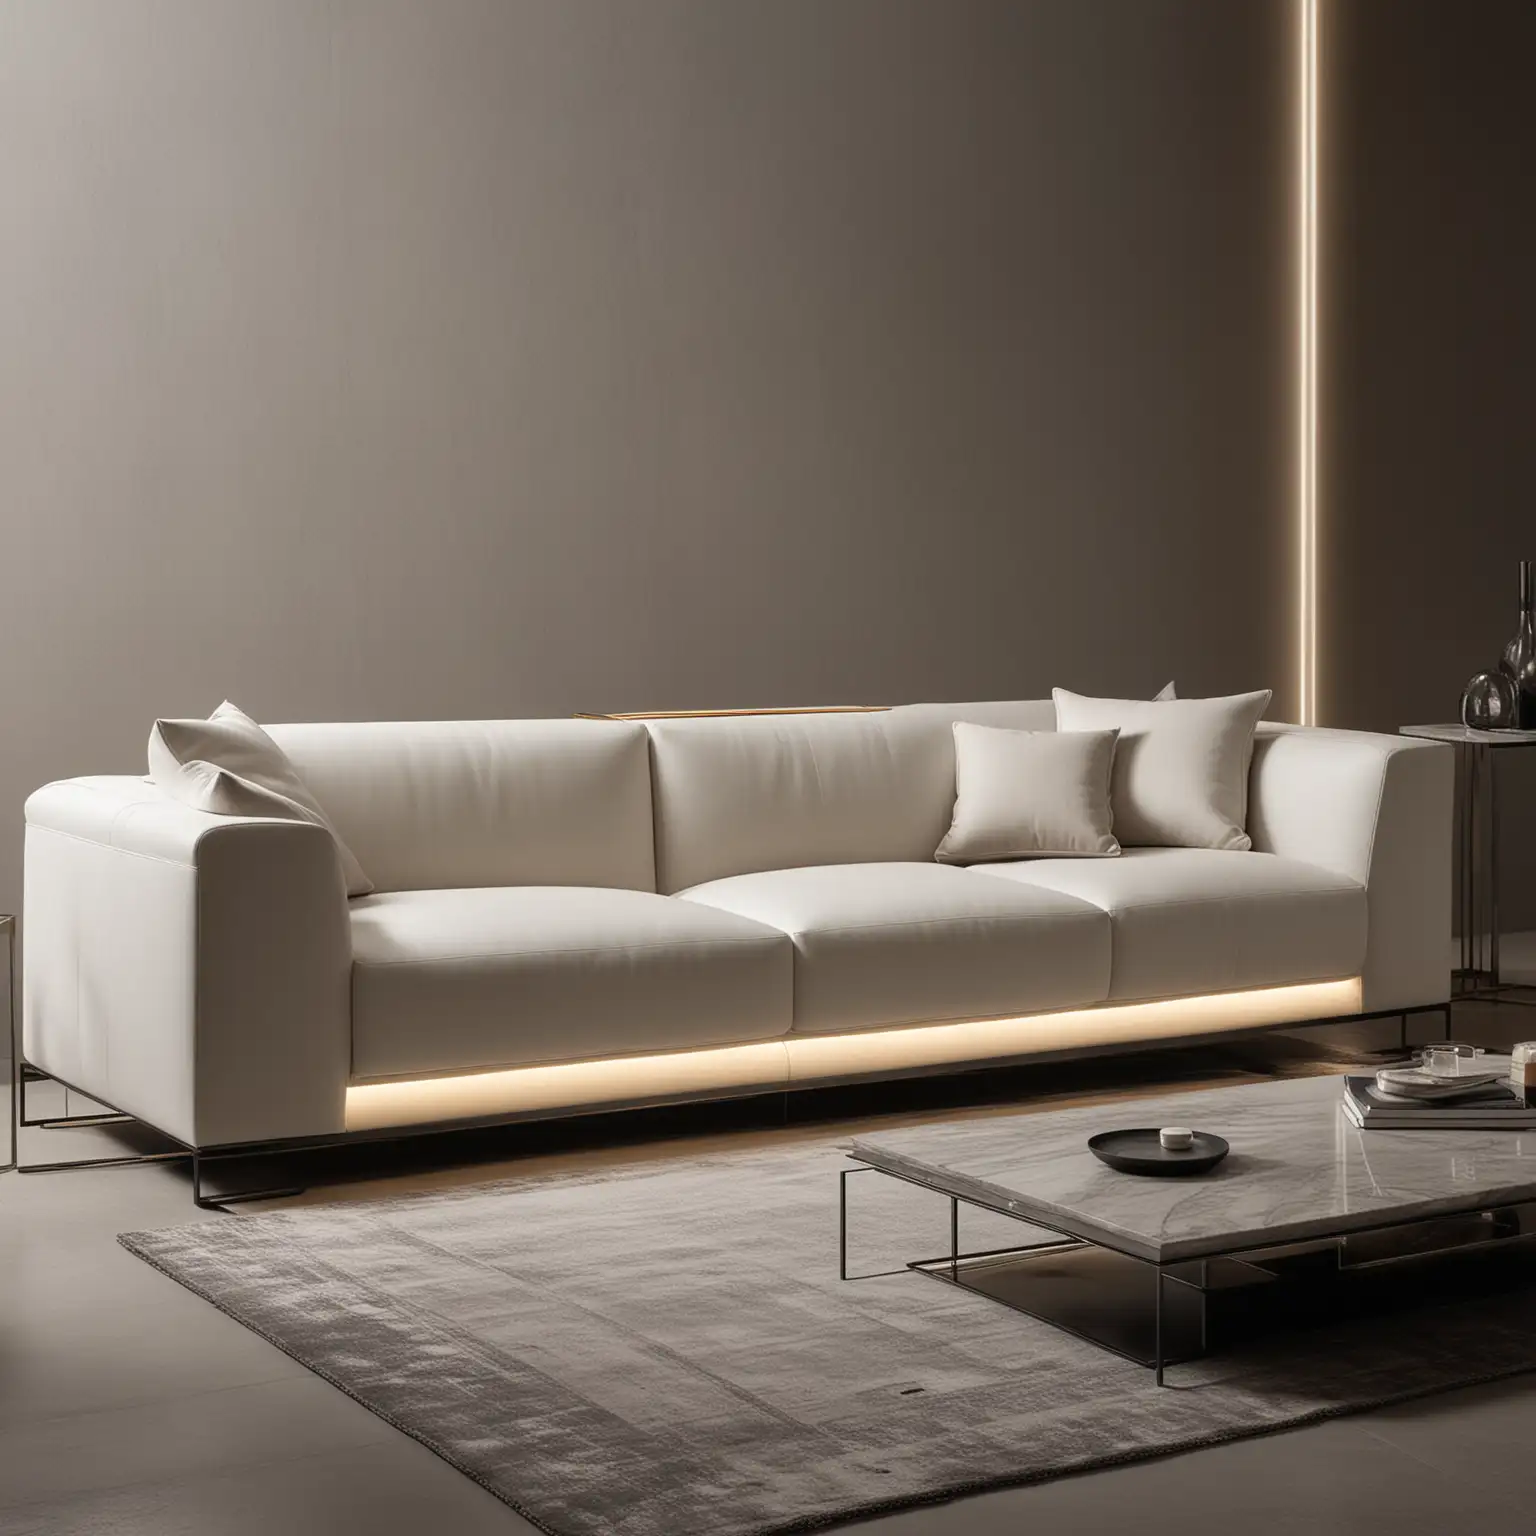 Contemporary Italian Sofa with Turkish Influence and LED Accents